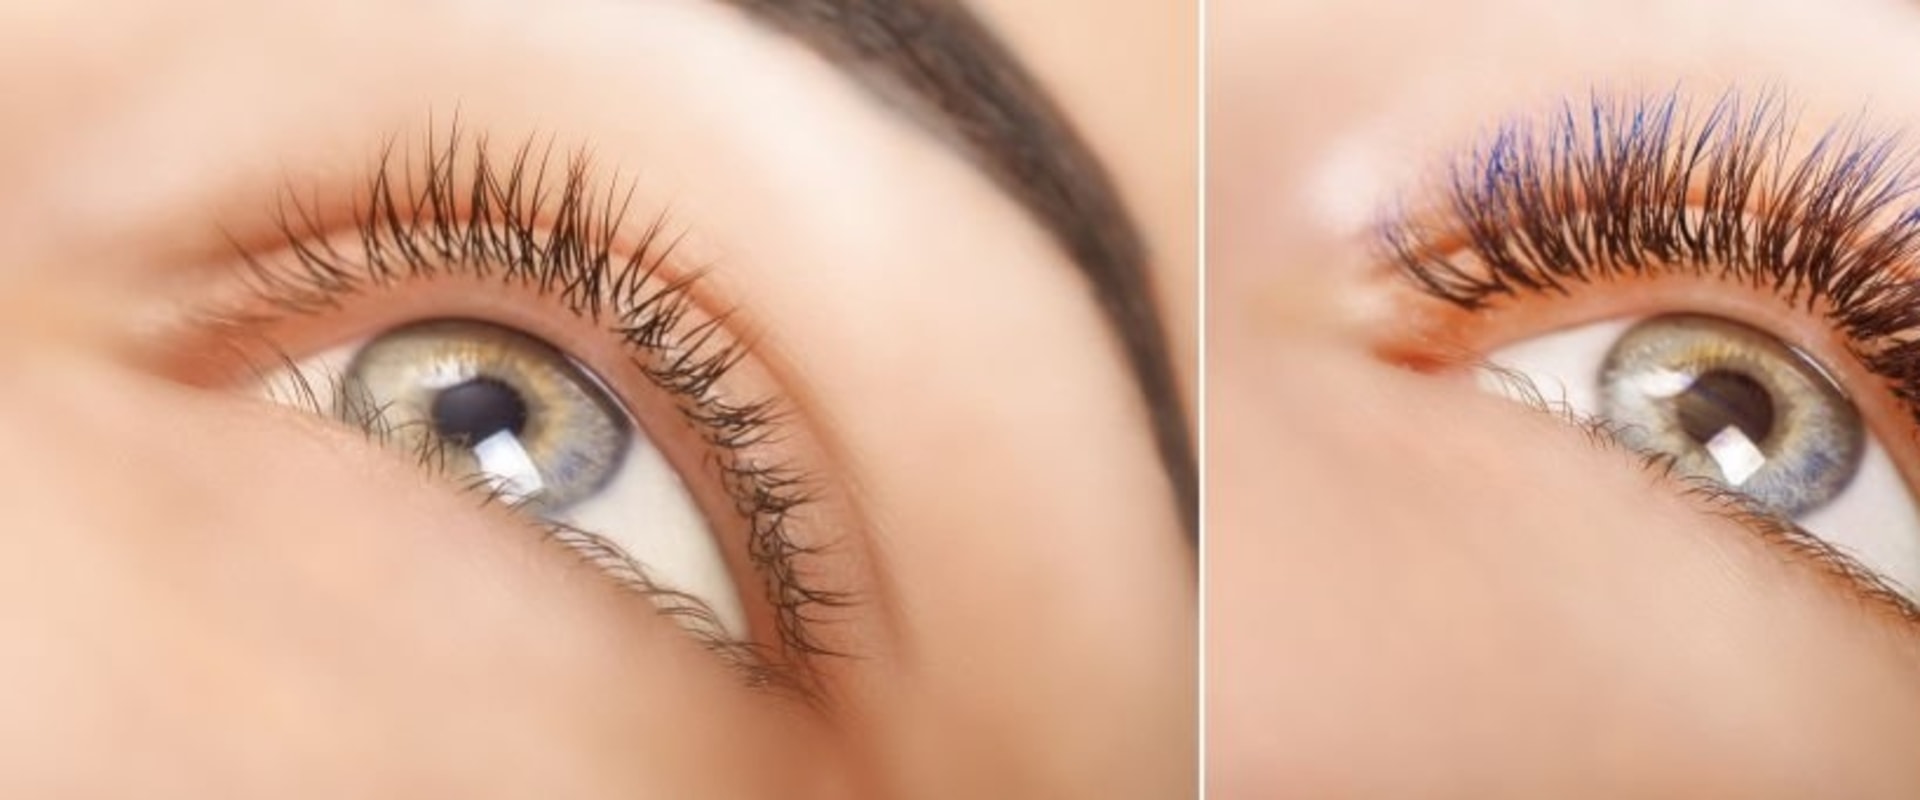 Can styes be caused by eyelash extensions?